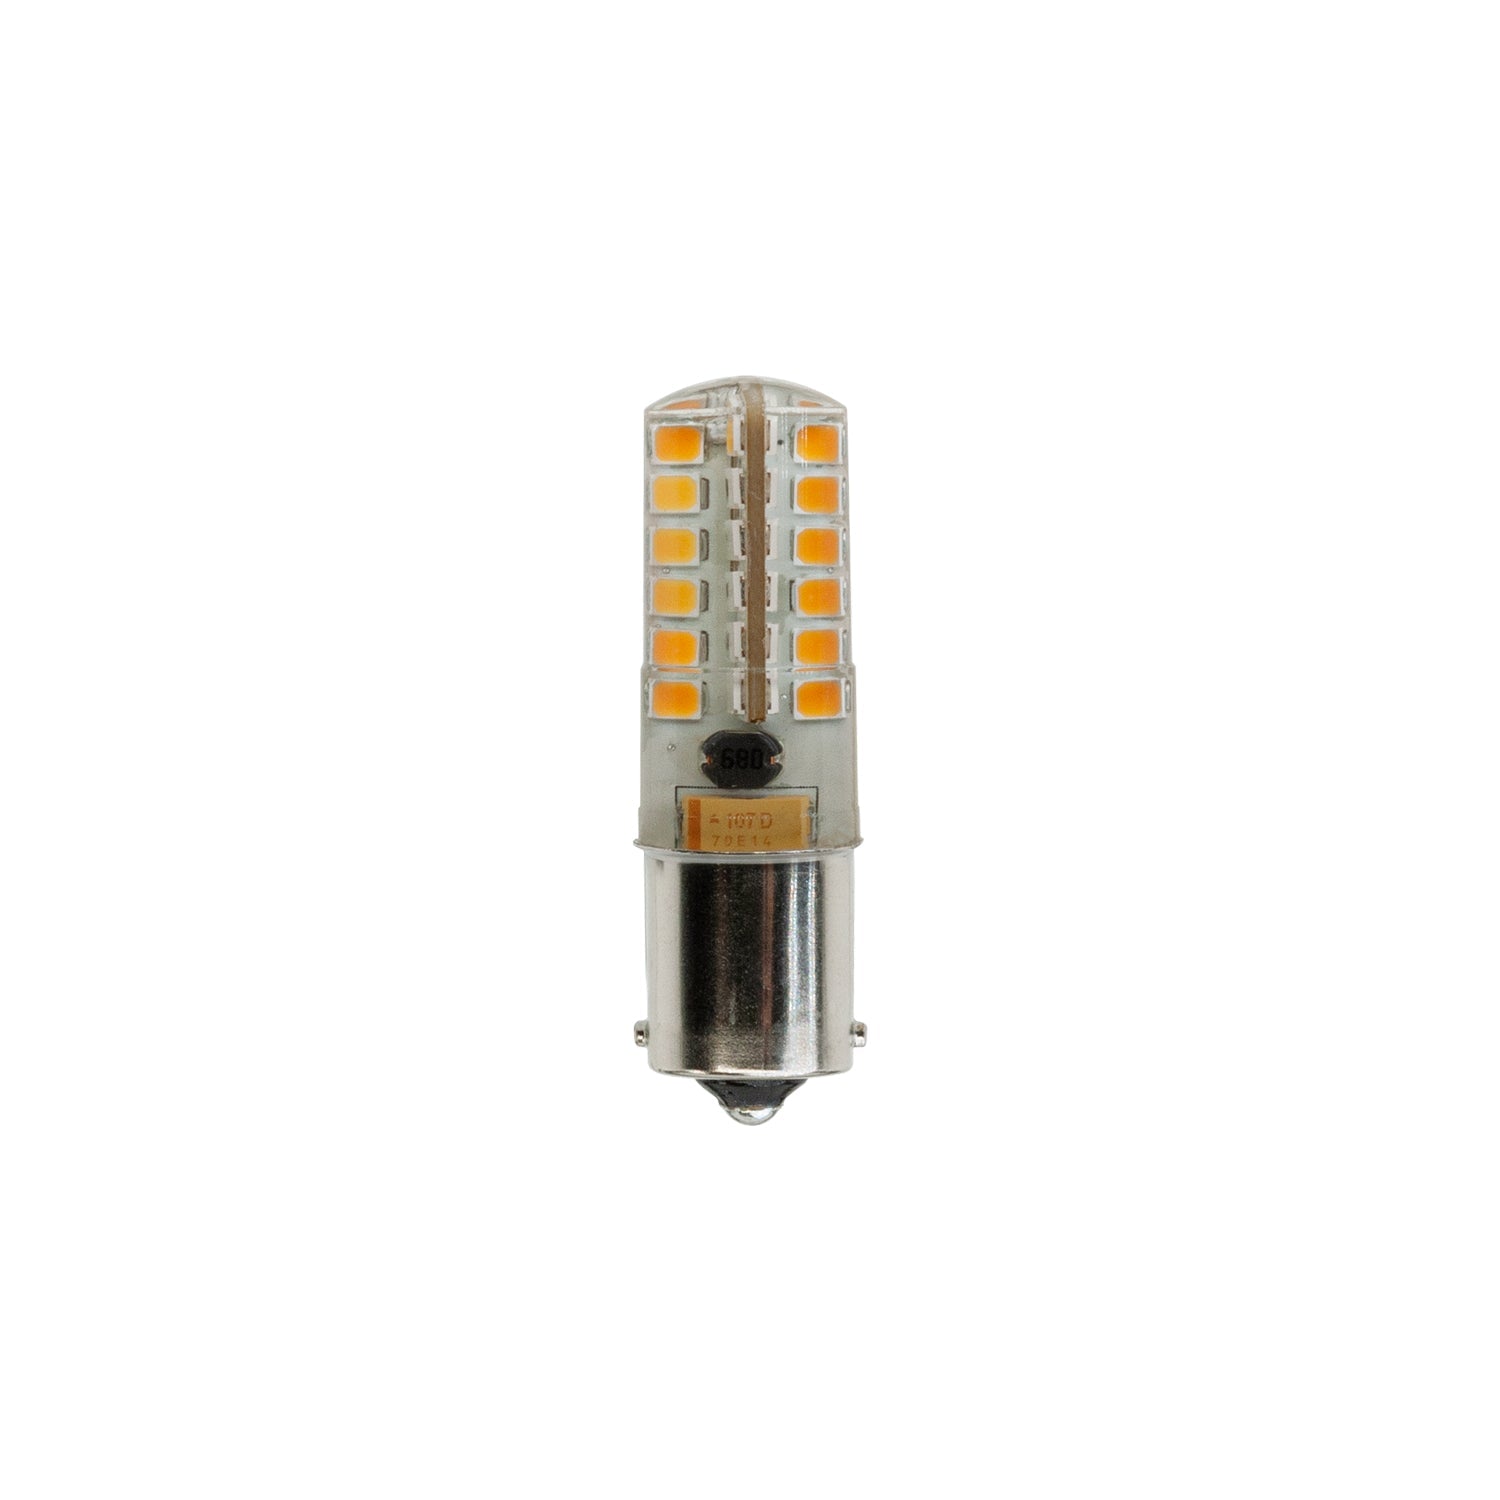  LED-1156-WW - LED 1156 option for automotive and other